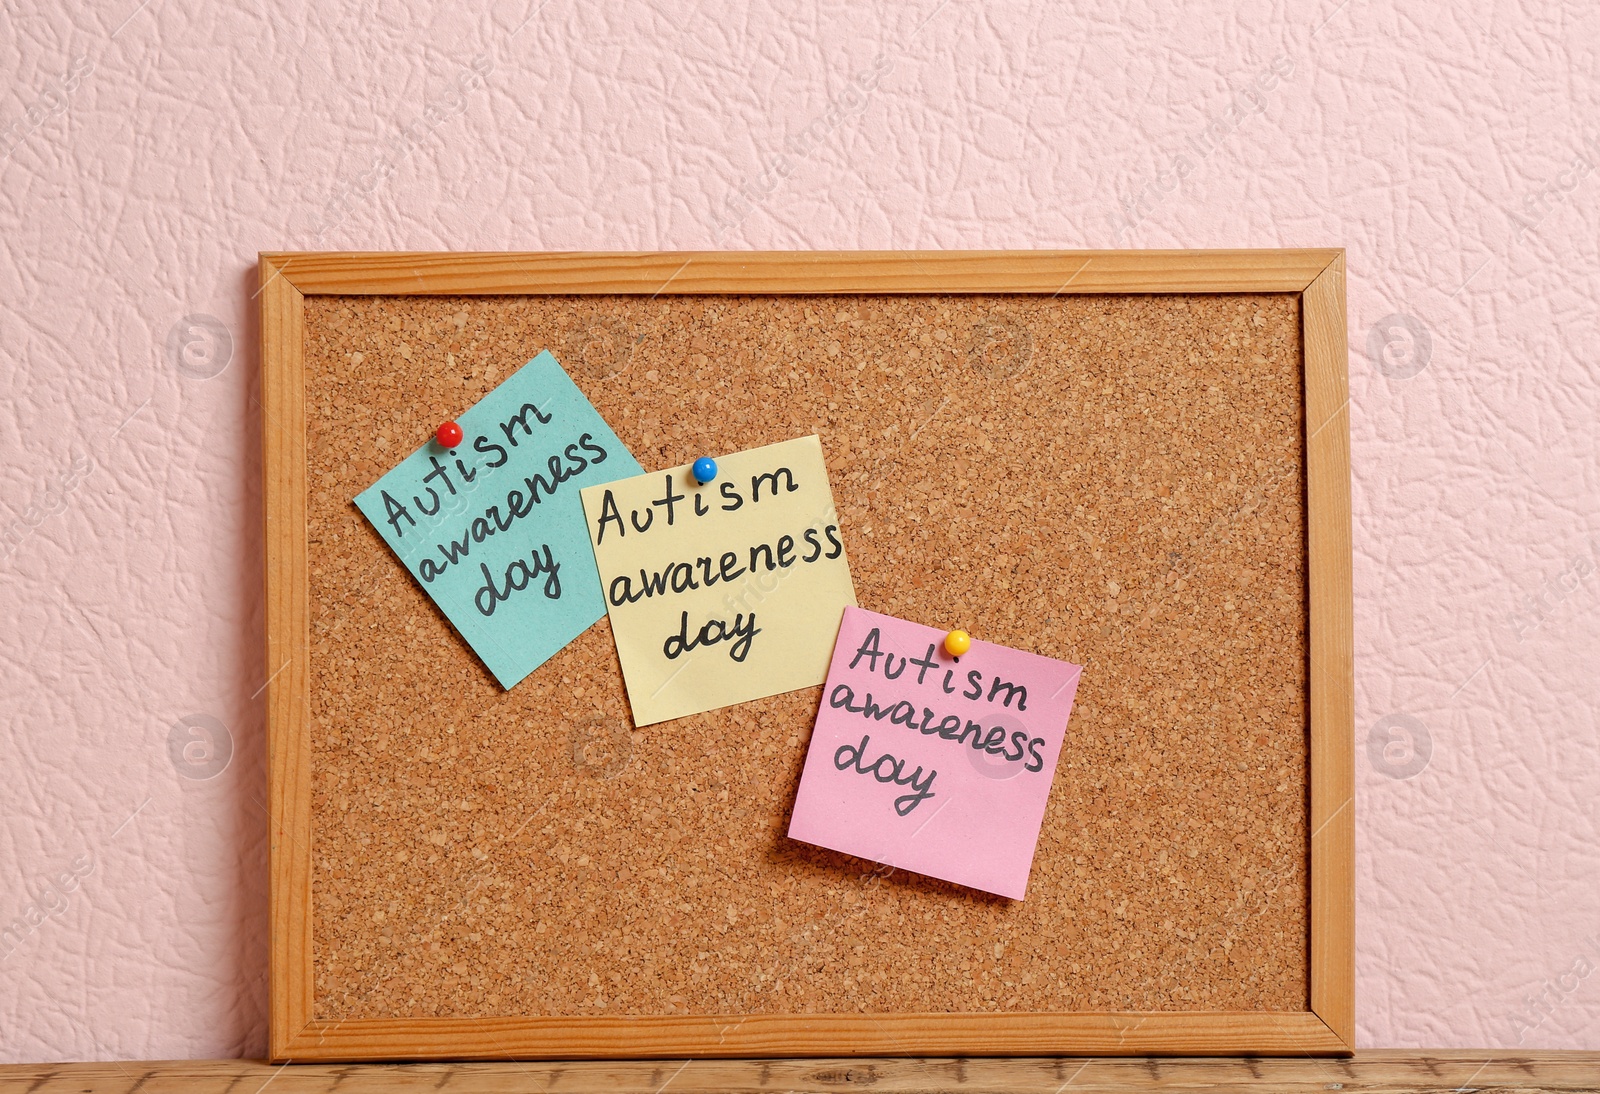 Photo of Notes with phrase "Autism awareness day" on cork board against color background